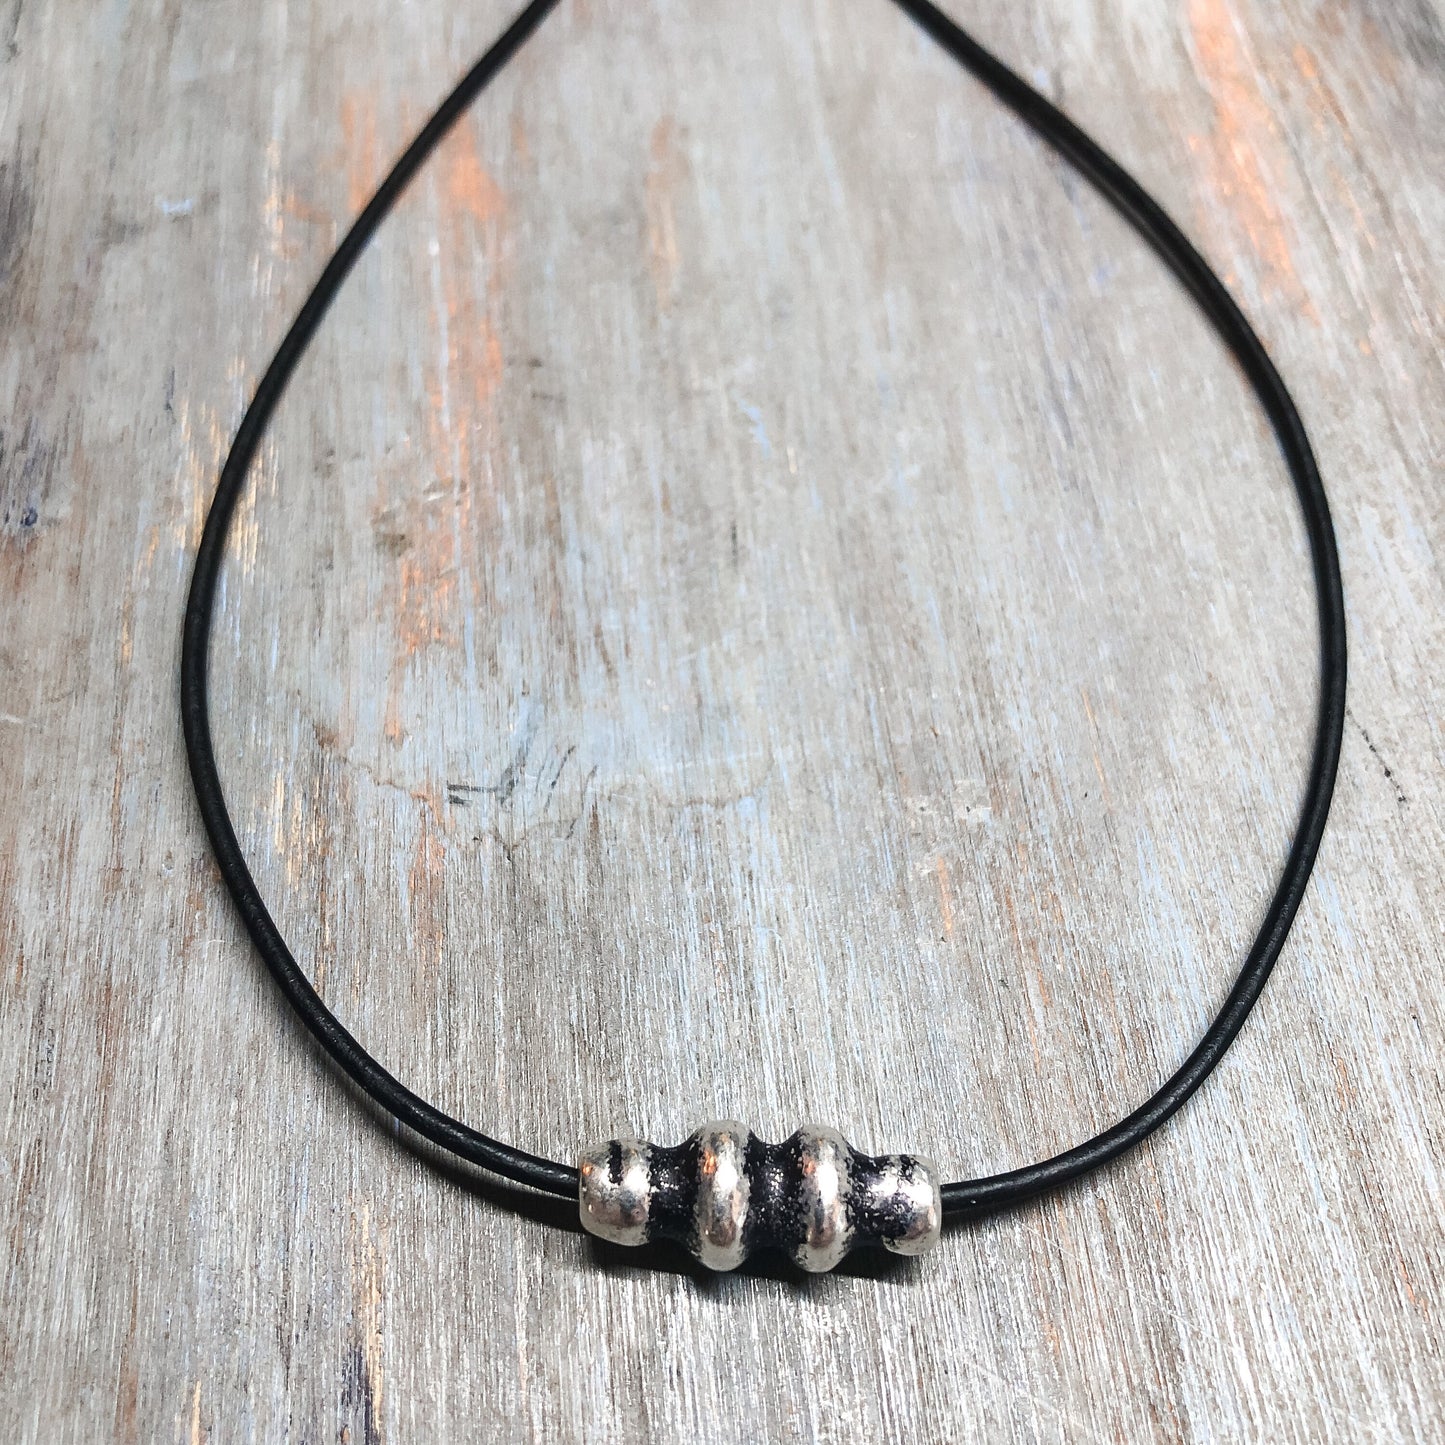 Unique leather cord necklace for women men | Leather jewelry for him and her | Boho leather necklace | Layering pendant necklace